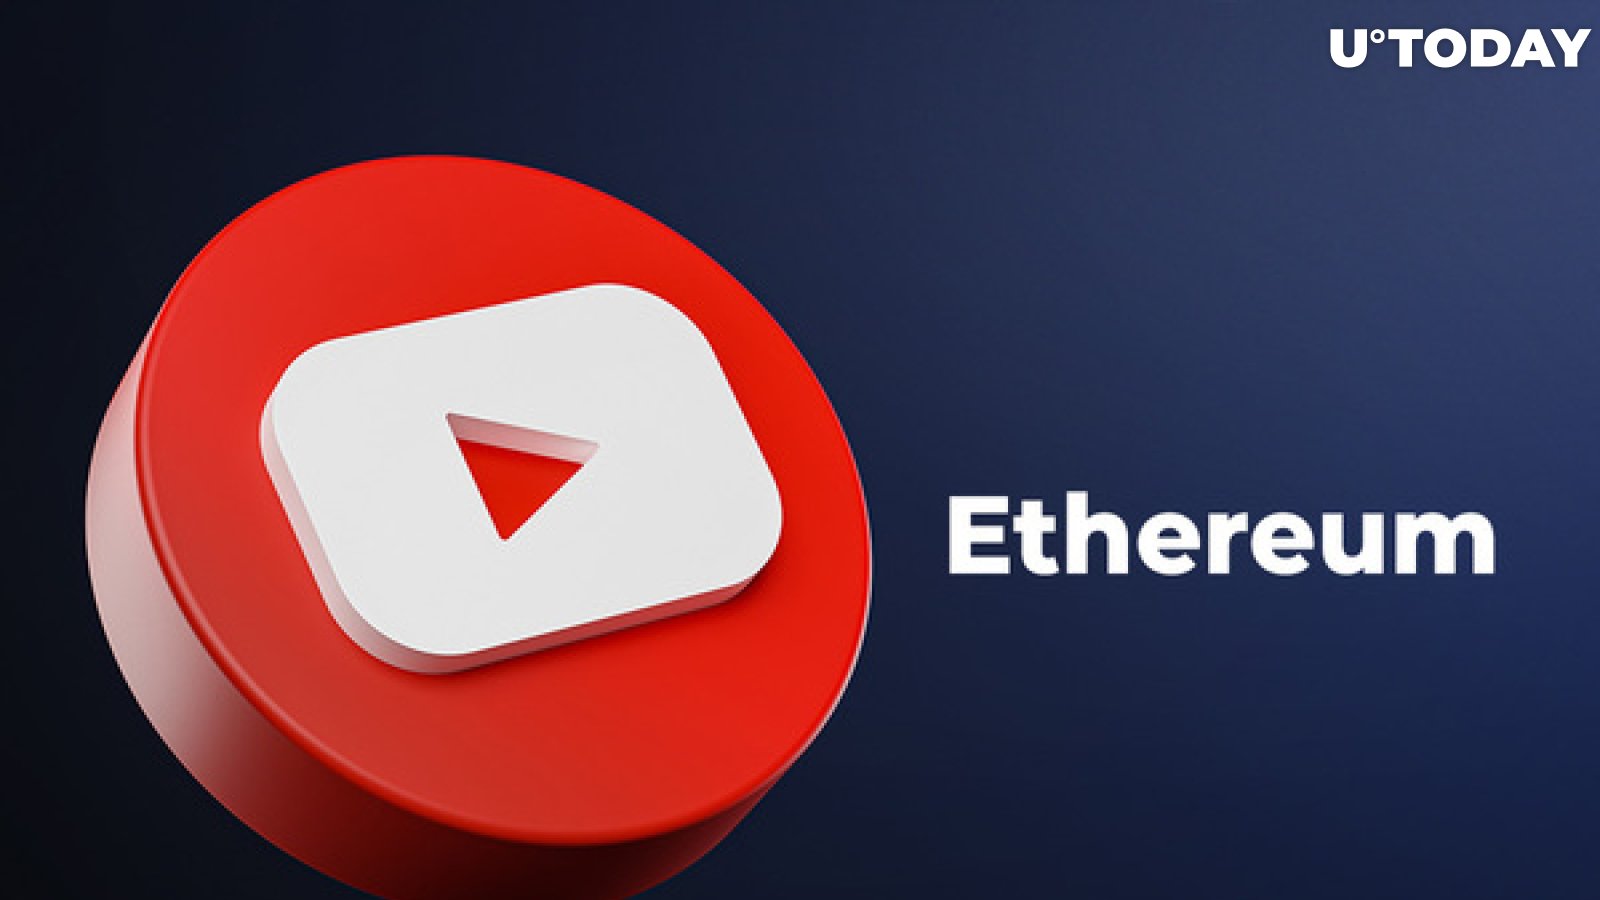 Ethereum Gets 231 Million Views on YouTube, Surpassing Bitcoin and All Other Crypto